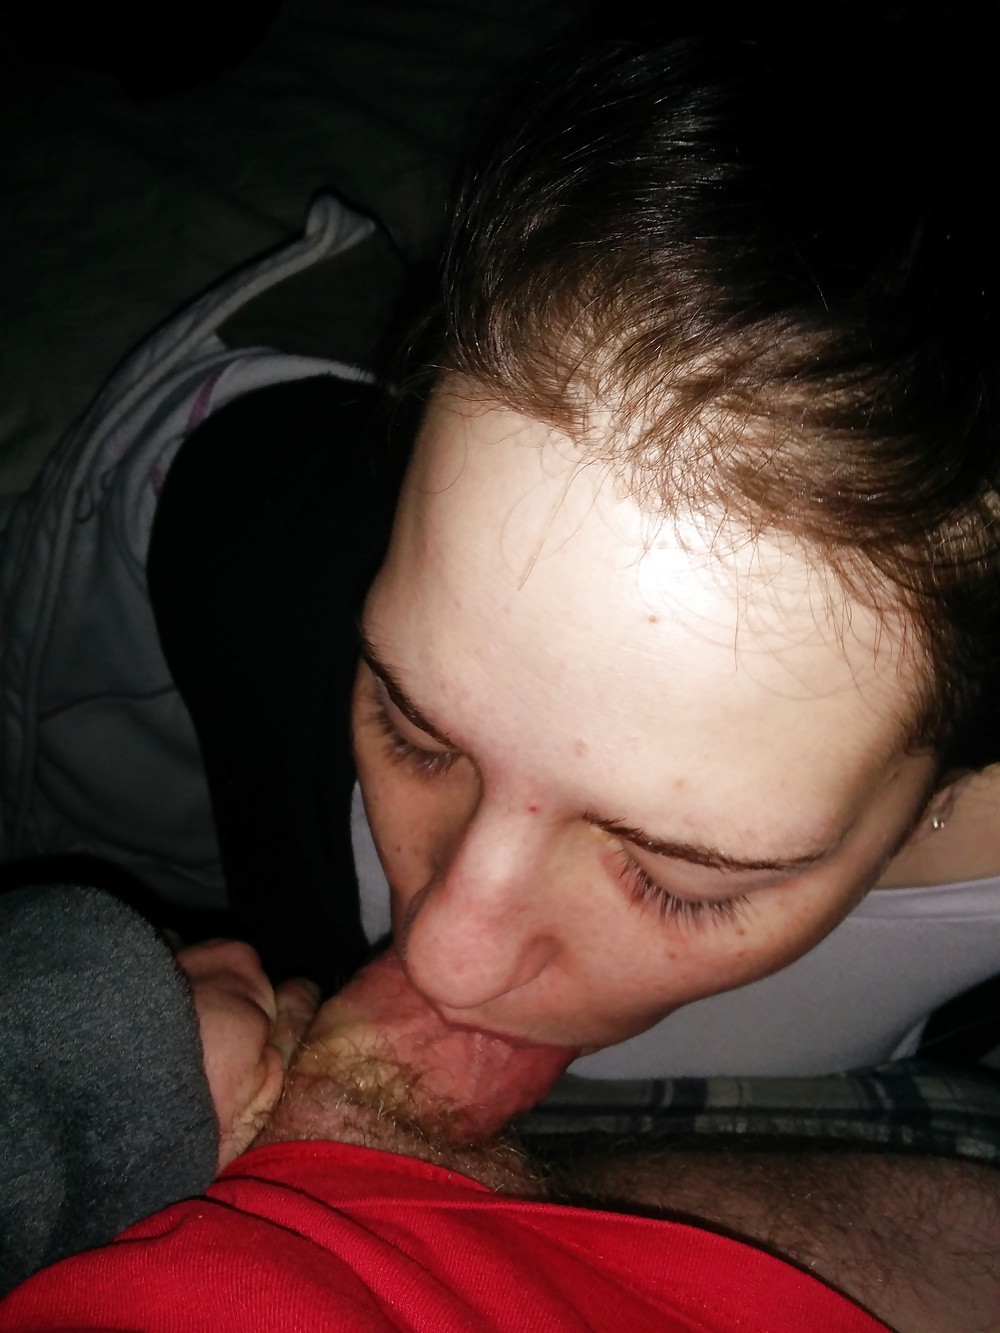 My cock on her face. #31753783